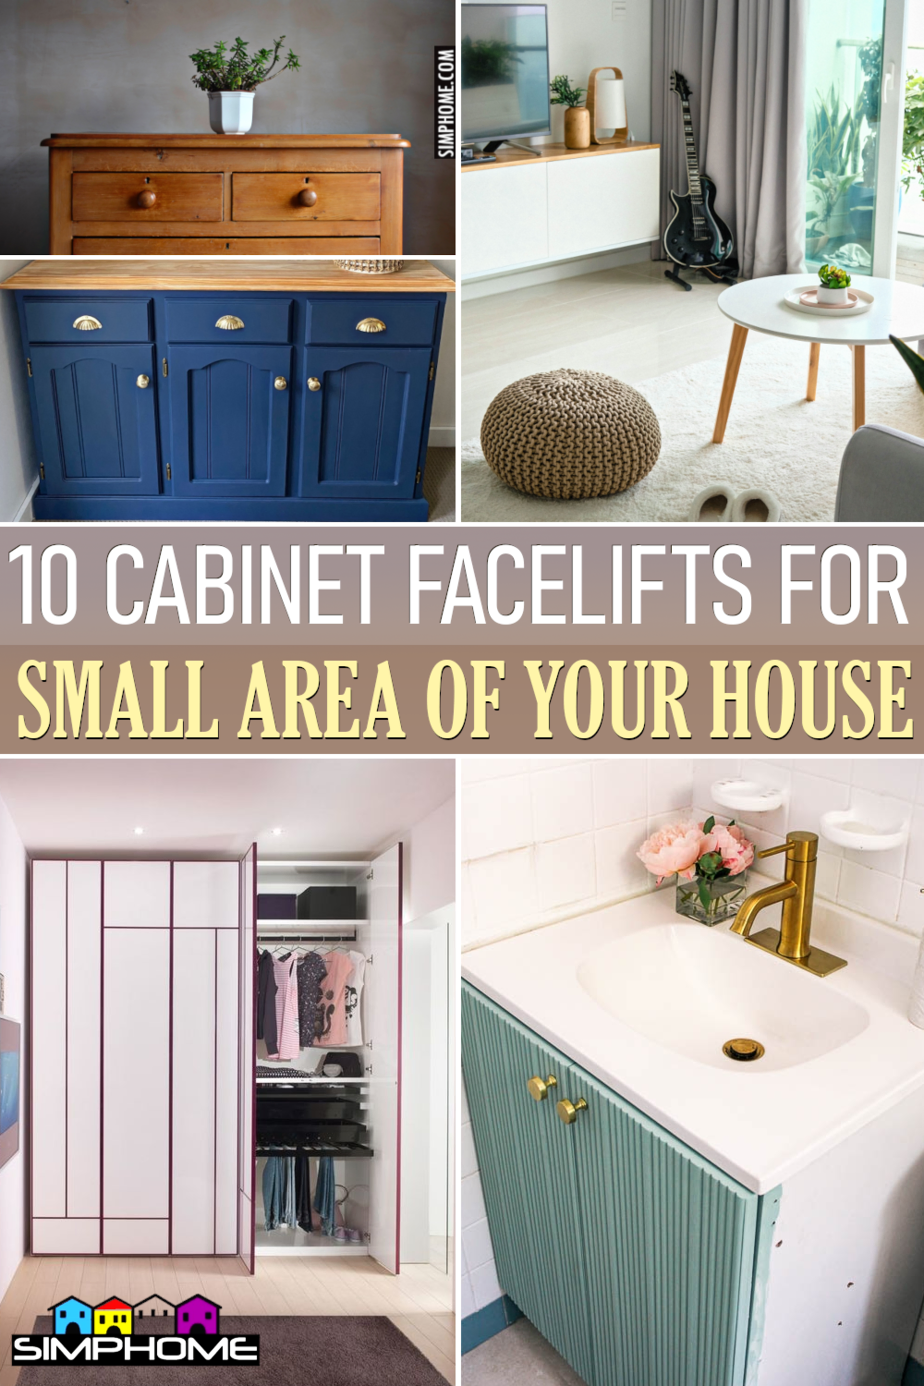 10 Cabinet Facelifts for Small Space via Simphome.comFeatured